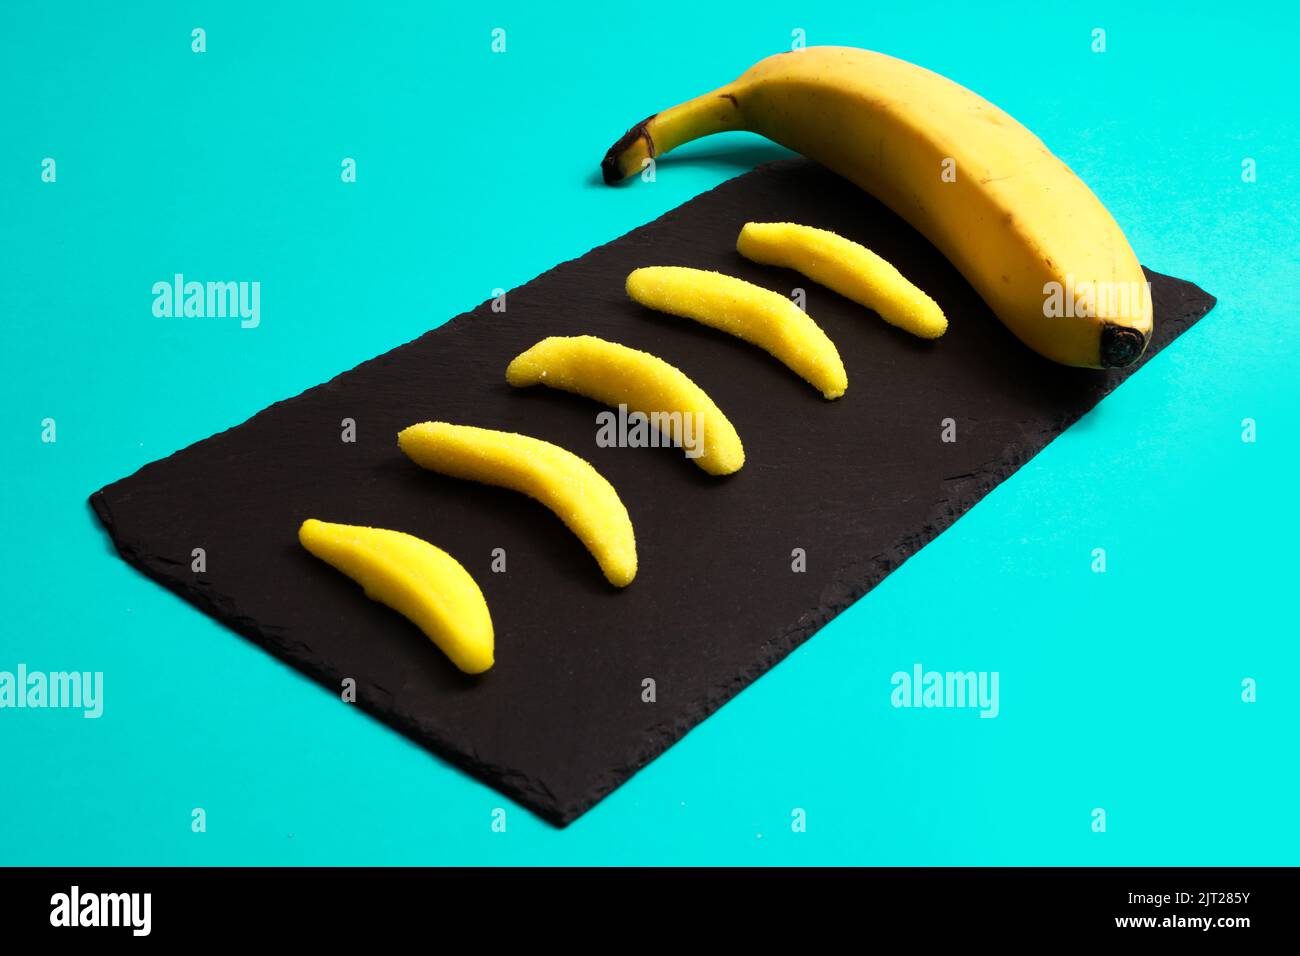 Small banana-shaped candies and a real banana on a black tray isolated on turquoise background Stock Photo